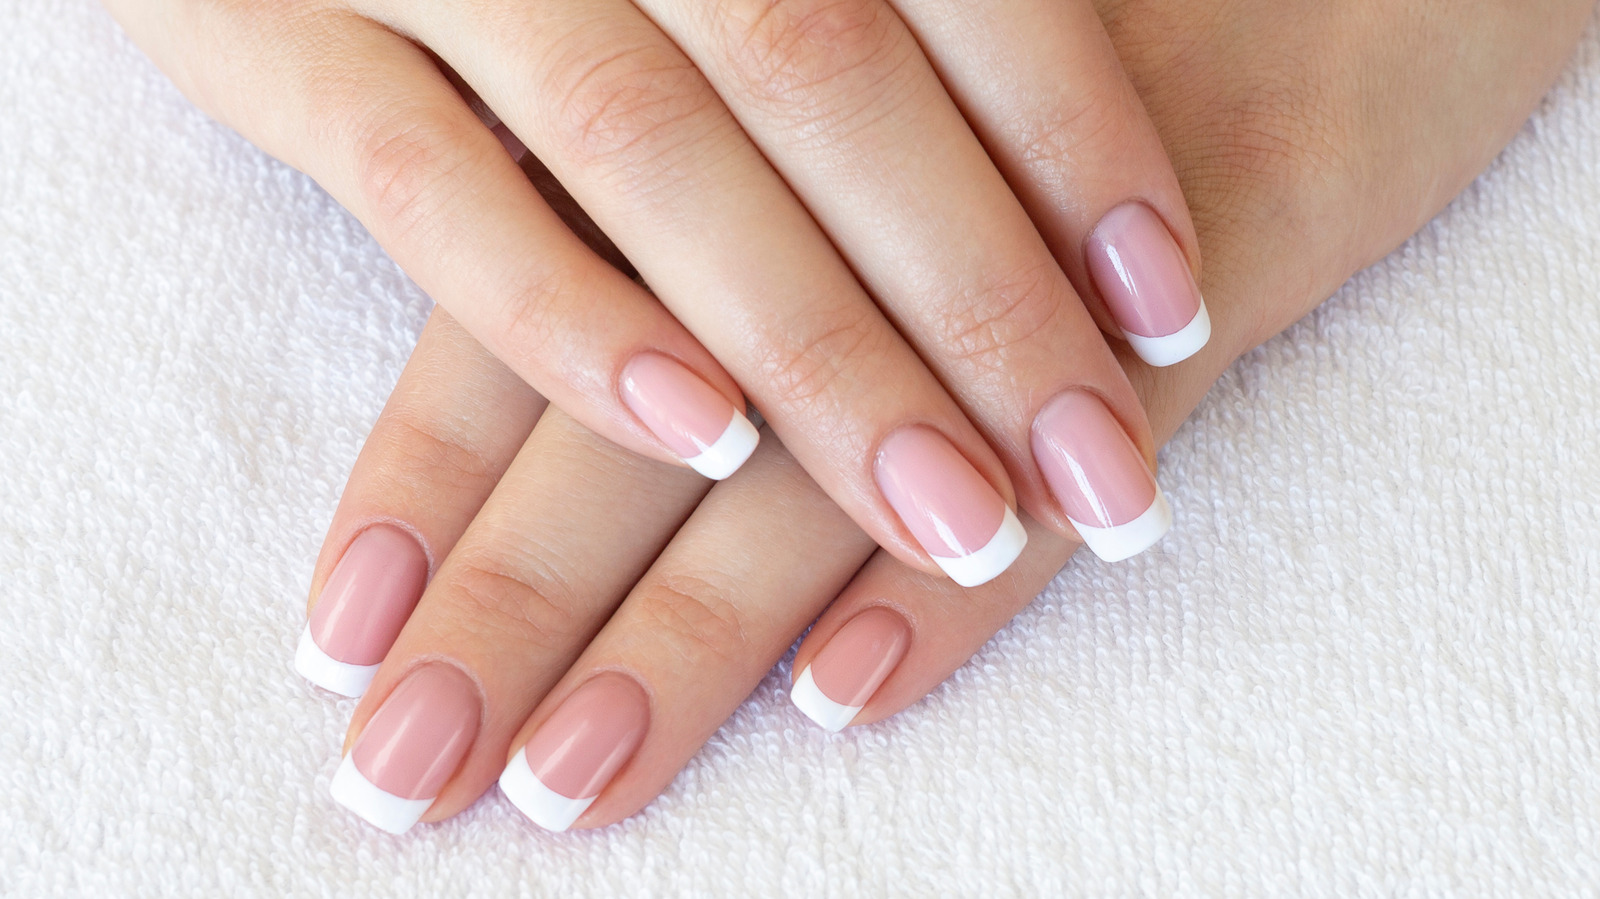 5. 50 Stunning French Manicure Designs for a Clean and Classic Look - wide 6